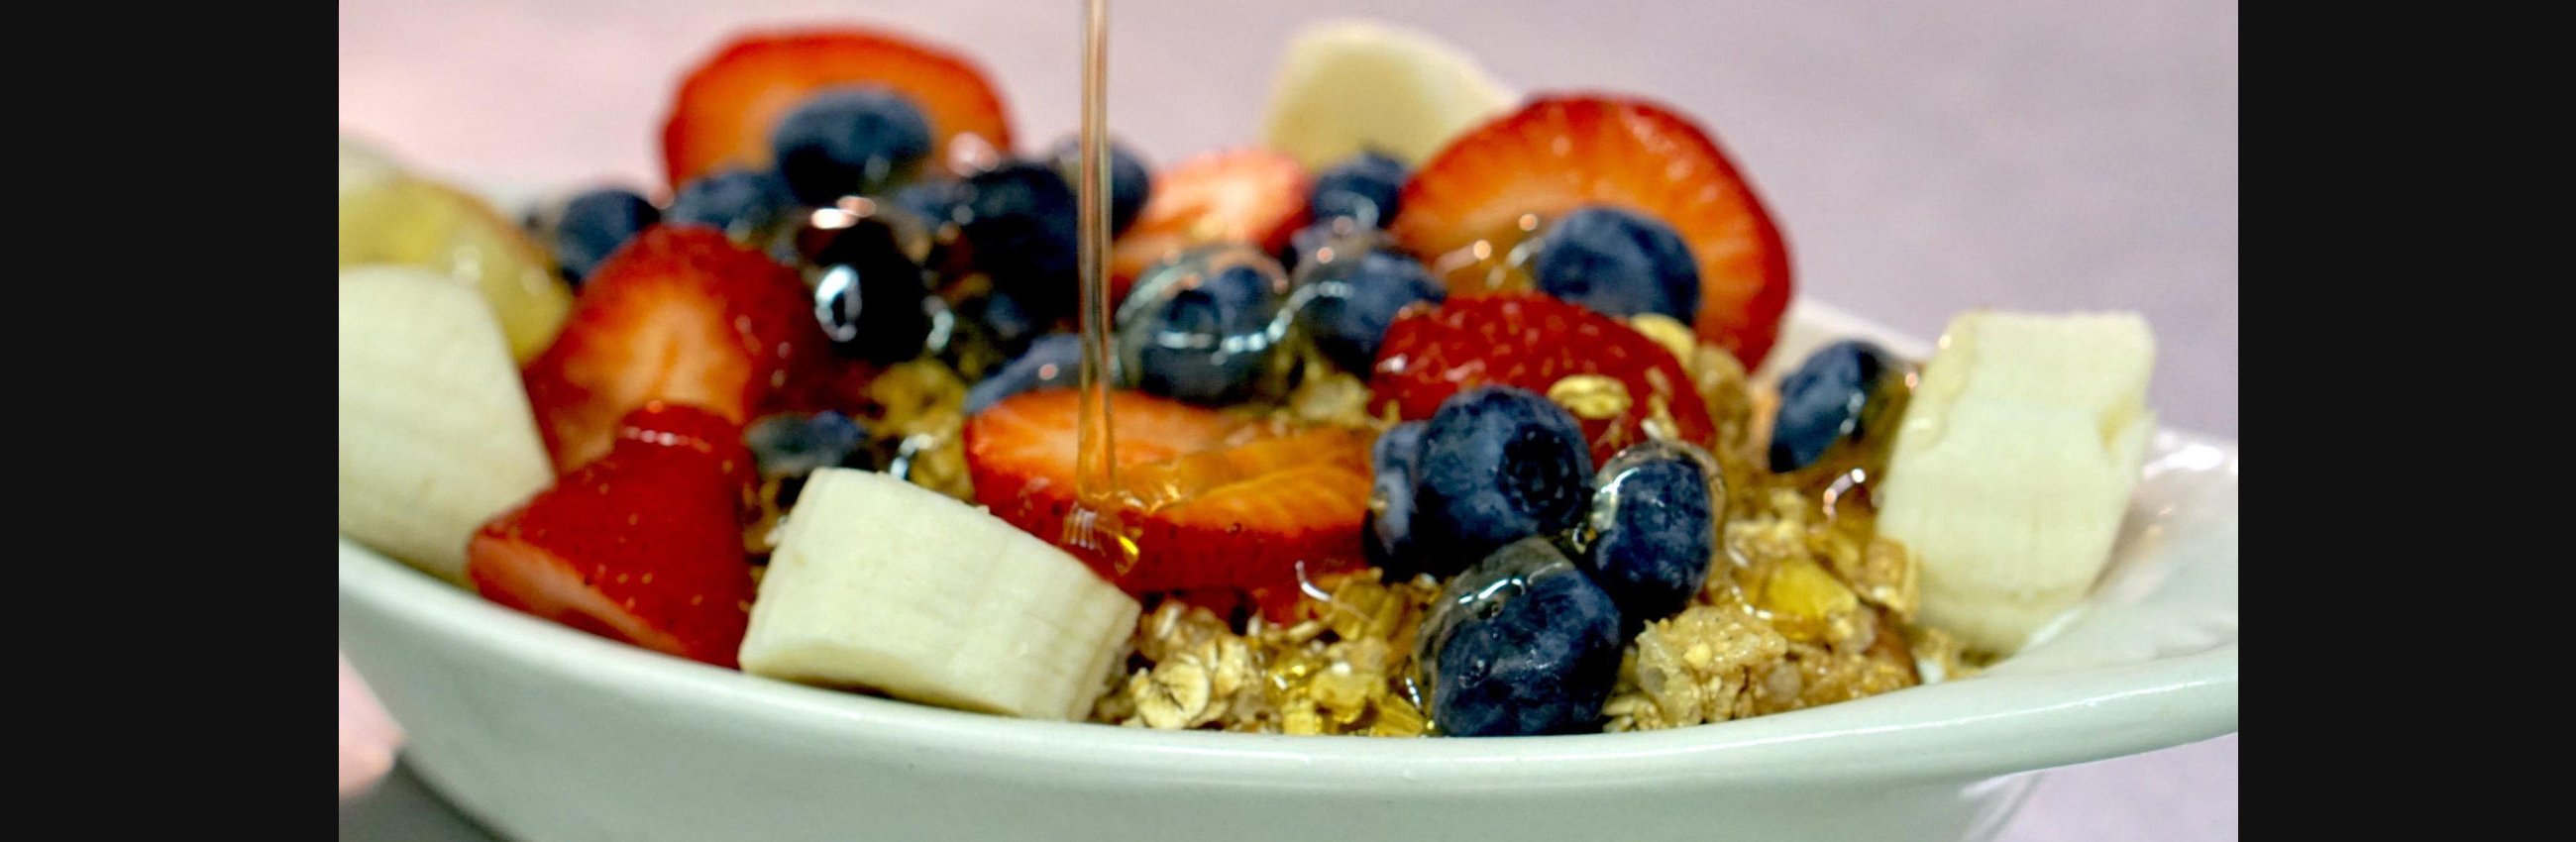 fruit with oatmeal in Myrtle Beach